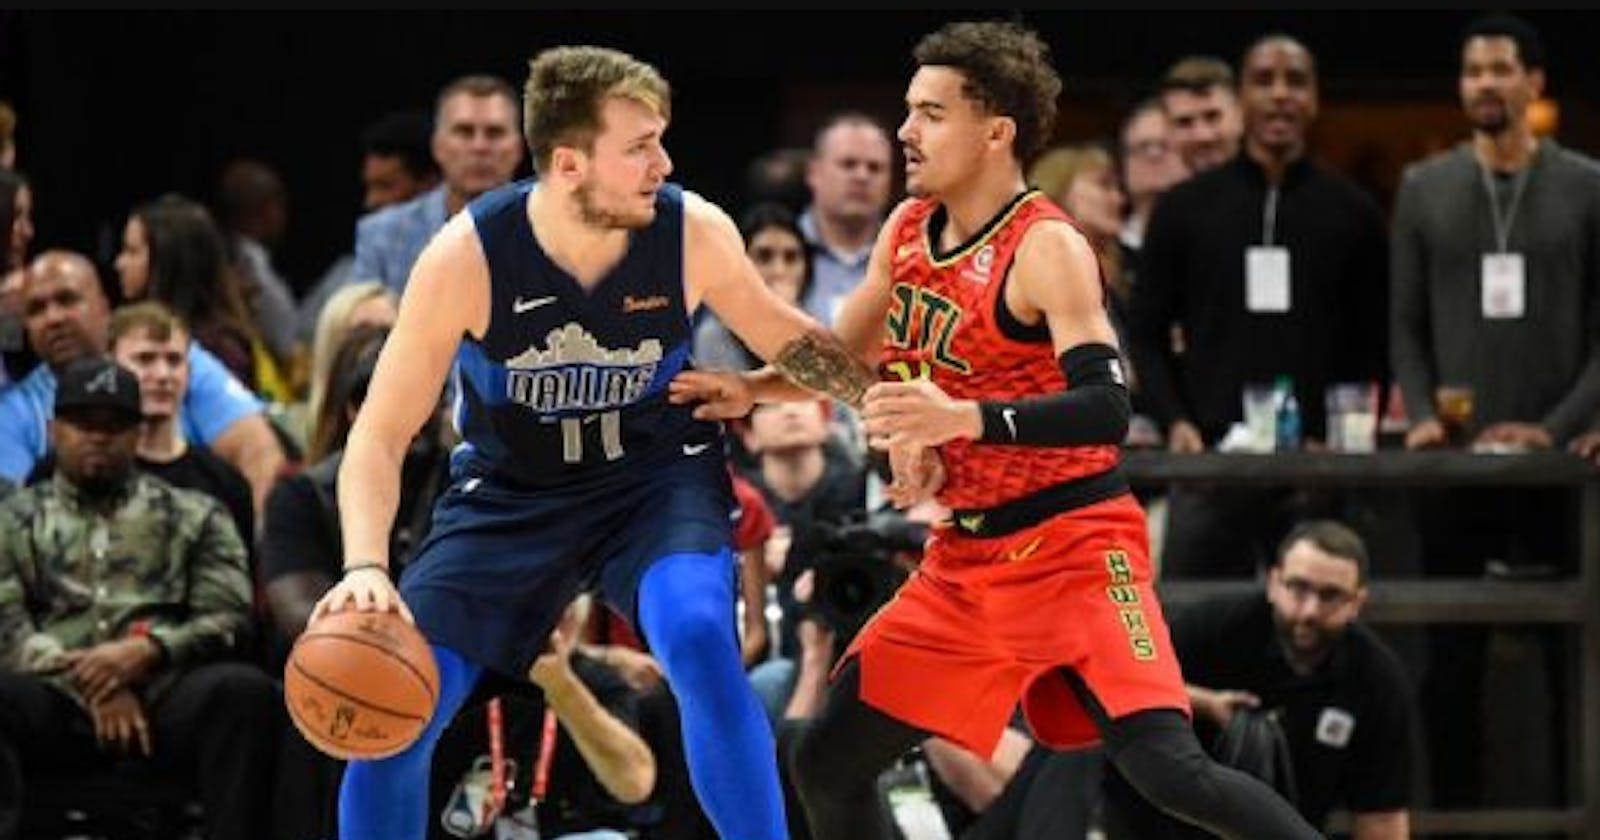 THE MAVS Bet everything only months into Doncic's newbie season